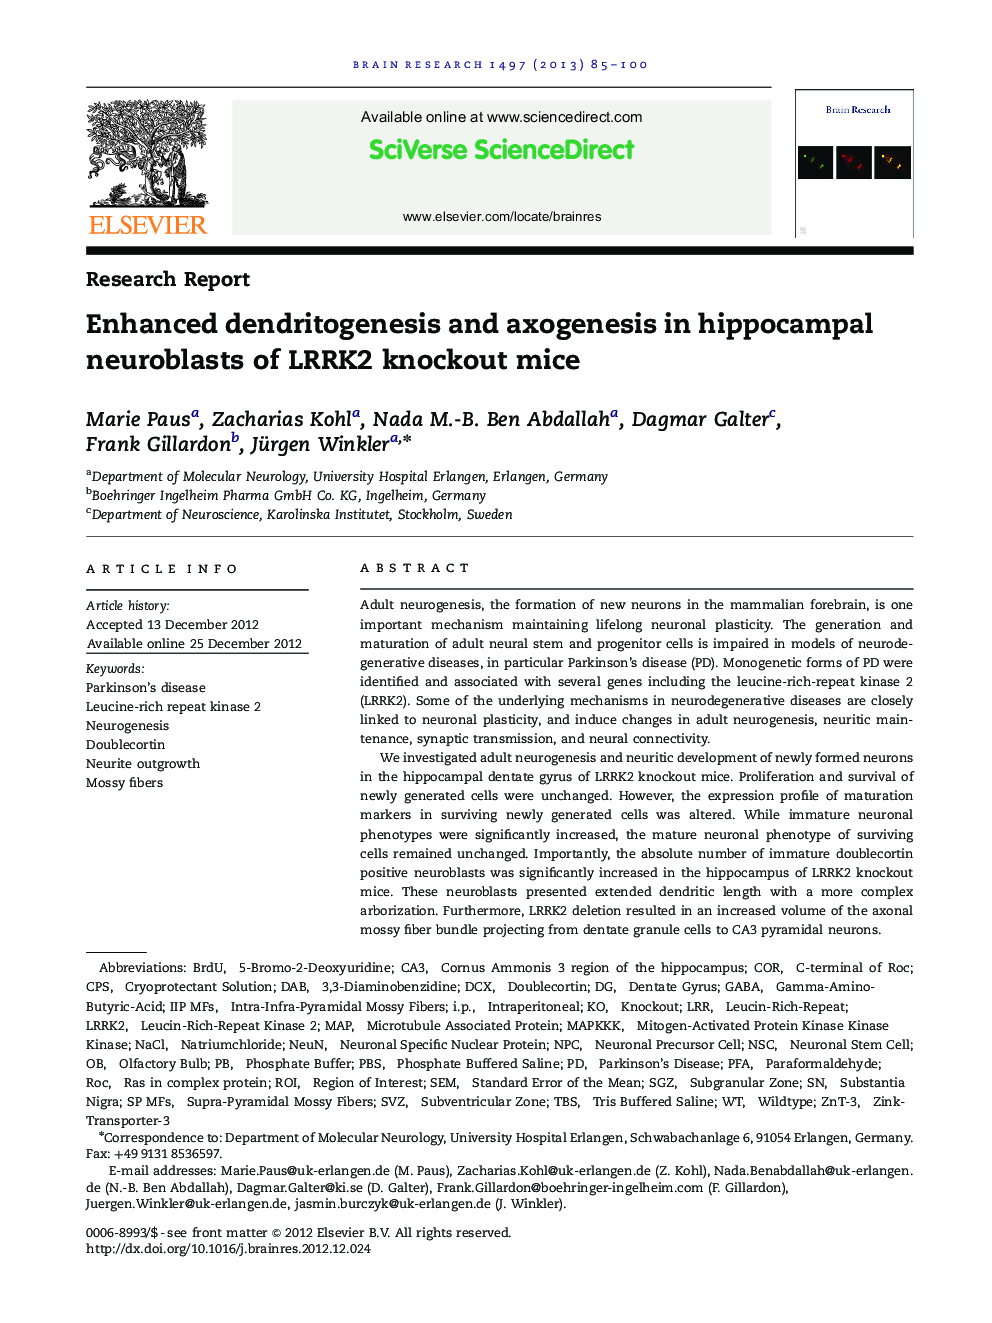 Enhanced dendritogenesis and axogenesis in hippocampal neuroblasts of LRRK2 knockout mice